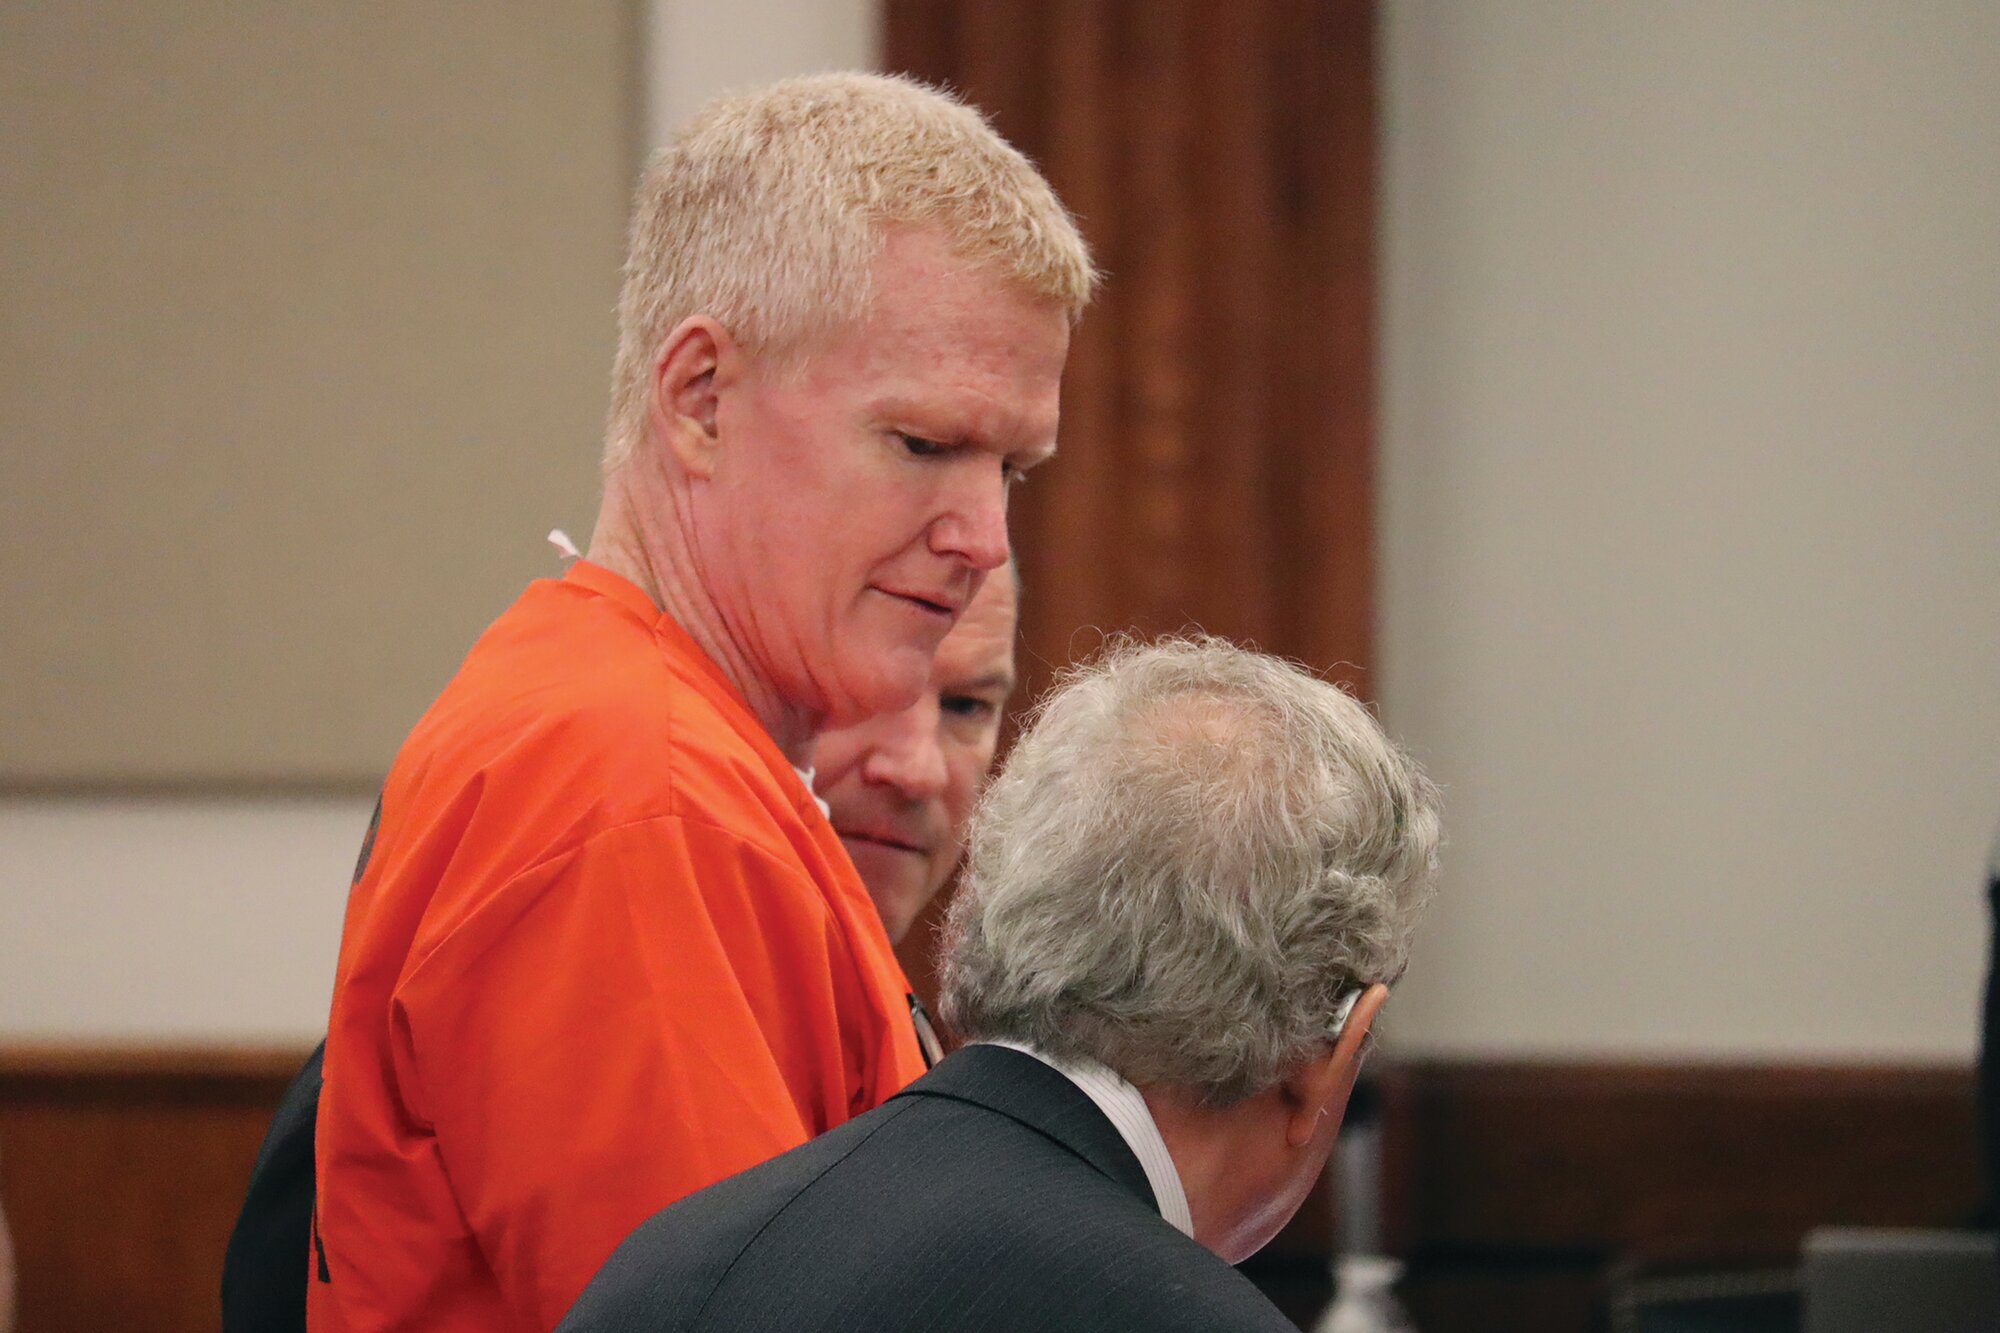 Convicted murderer Alex Murdaugh speaks with his defense attorney, Dick Harpootlian, in Beaufort, S.C. on Friday, Nov. 17, 2023. A pretrial hearing is scheduled Friday on state charges that Murdaugh stole money from his legal clients.